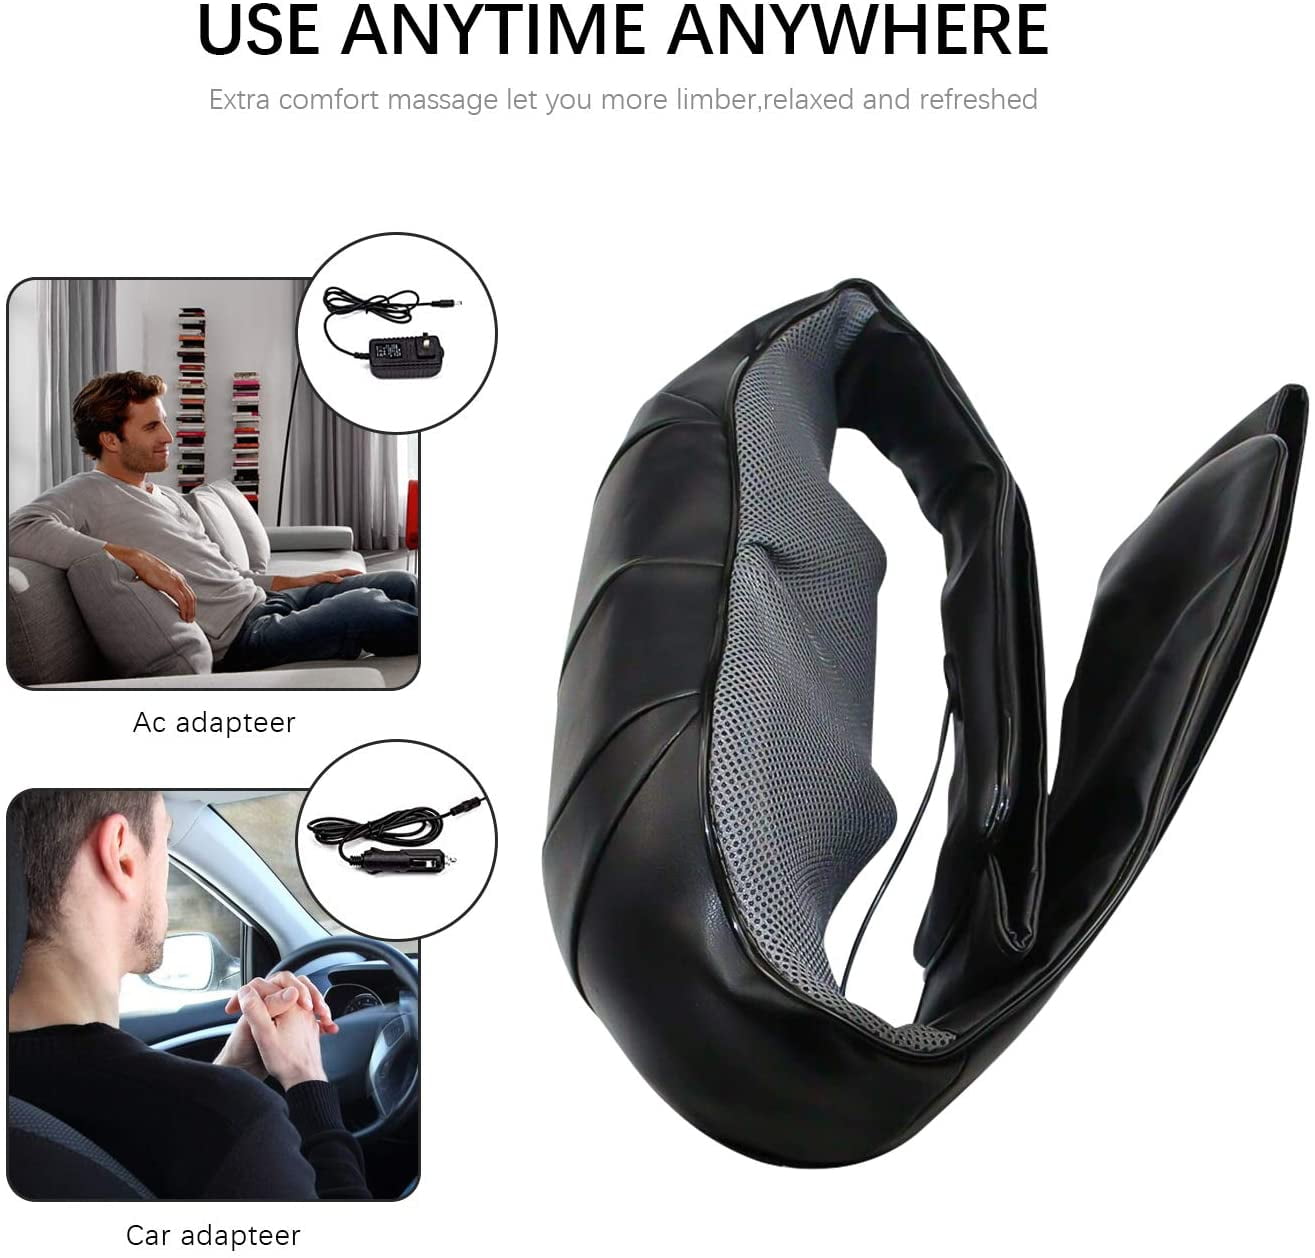 Neck/Back Portable Massager for Home/Work/In Car- Like New! - general for  sale - by owner - craigslist